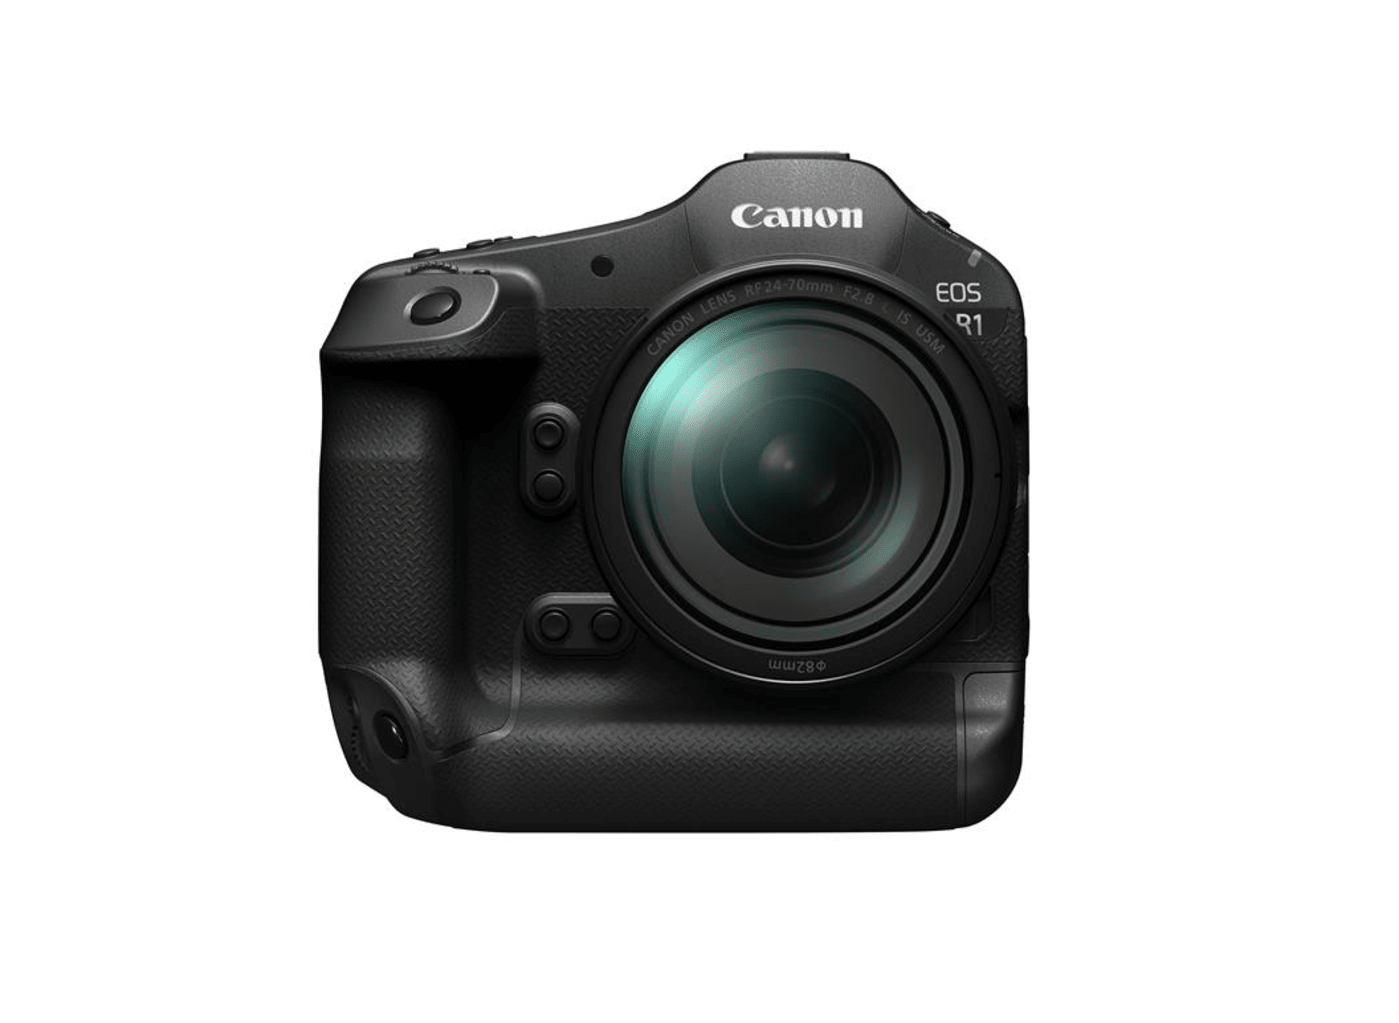 Canon confirms its long-rumored flagship EOS R1 is coming later this year